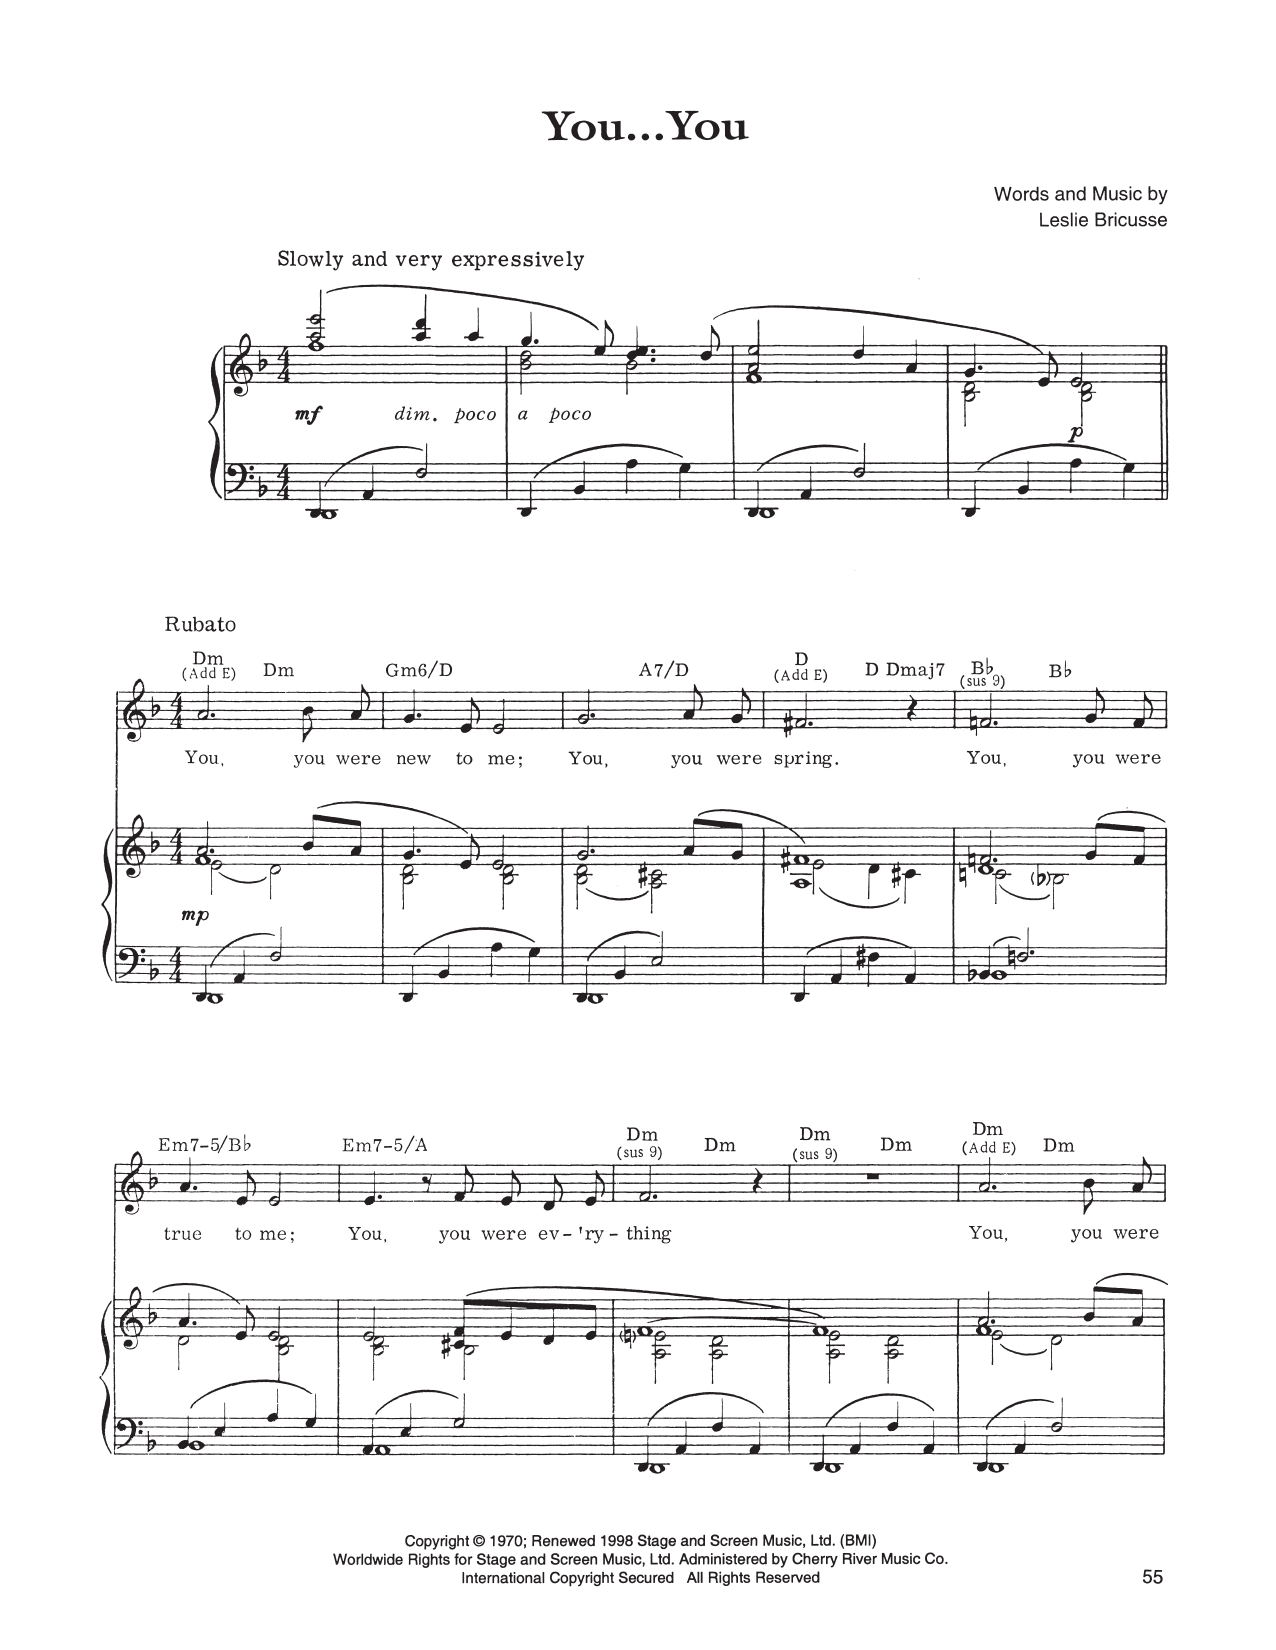 Download Leslie Bricusse You... You Sheet Music